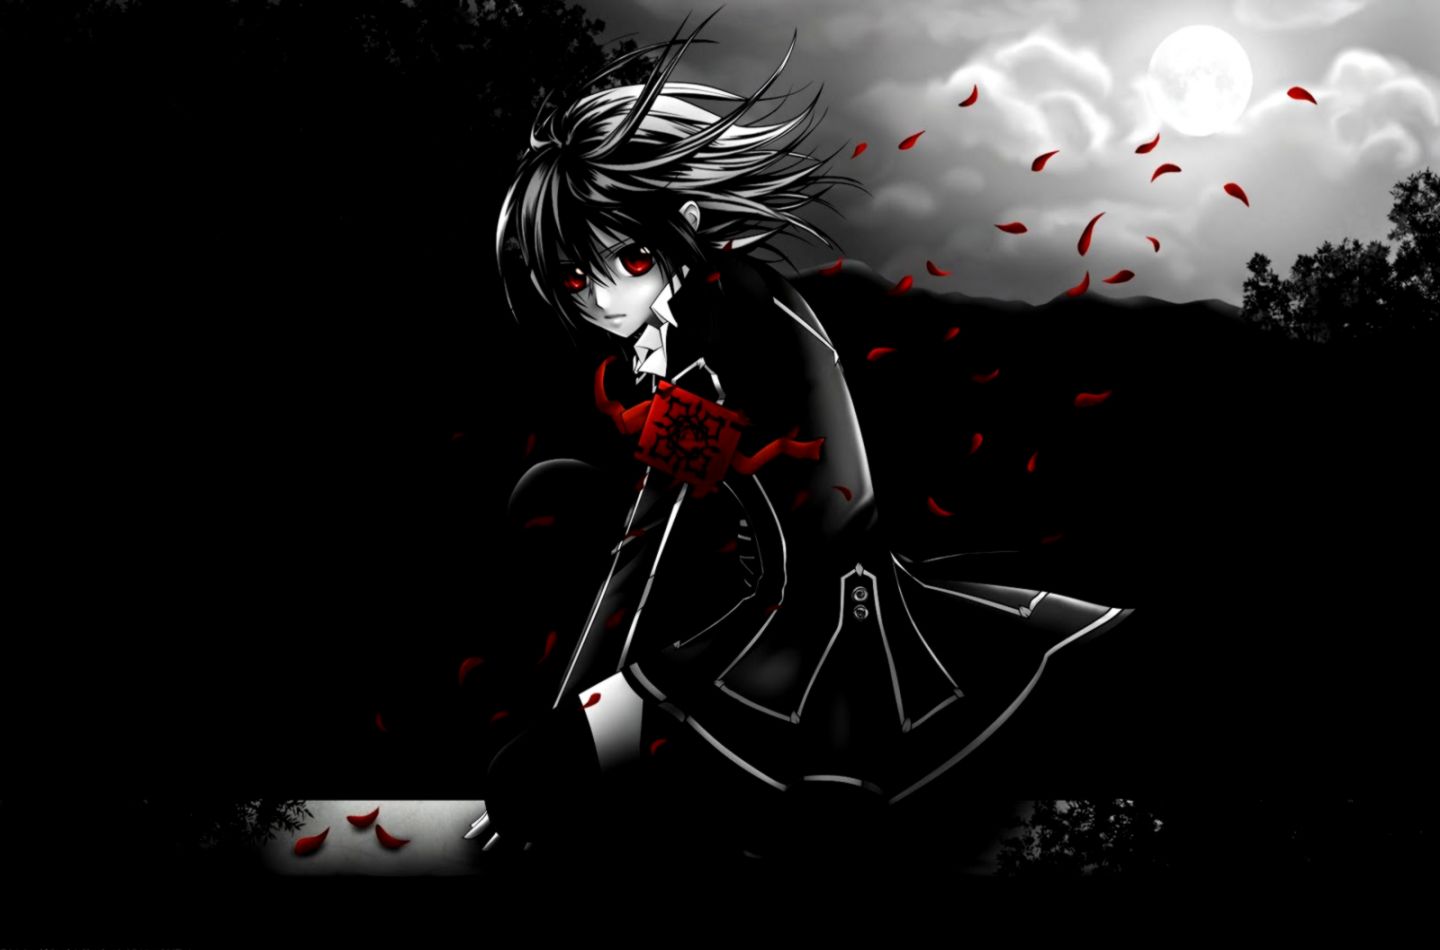 Emo Wallpaper APK for Android Download